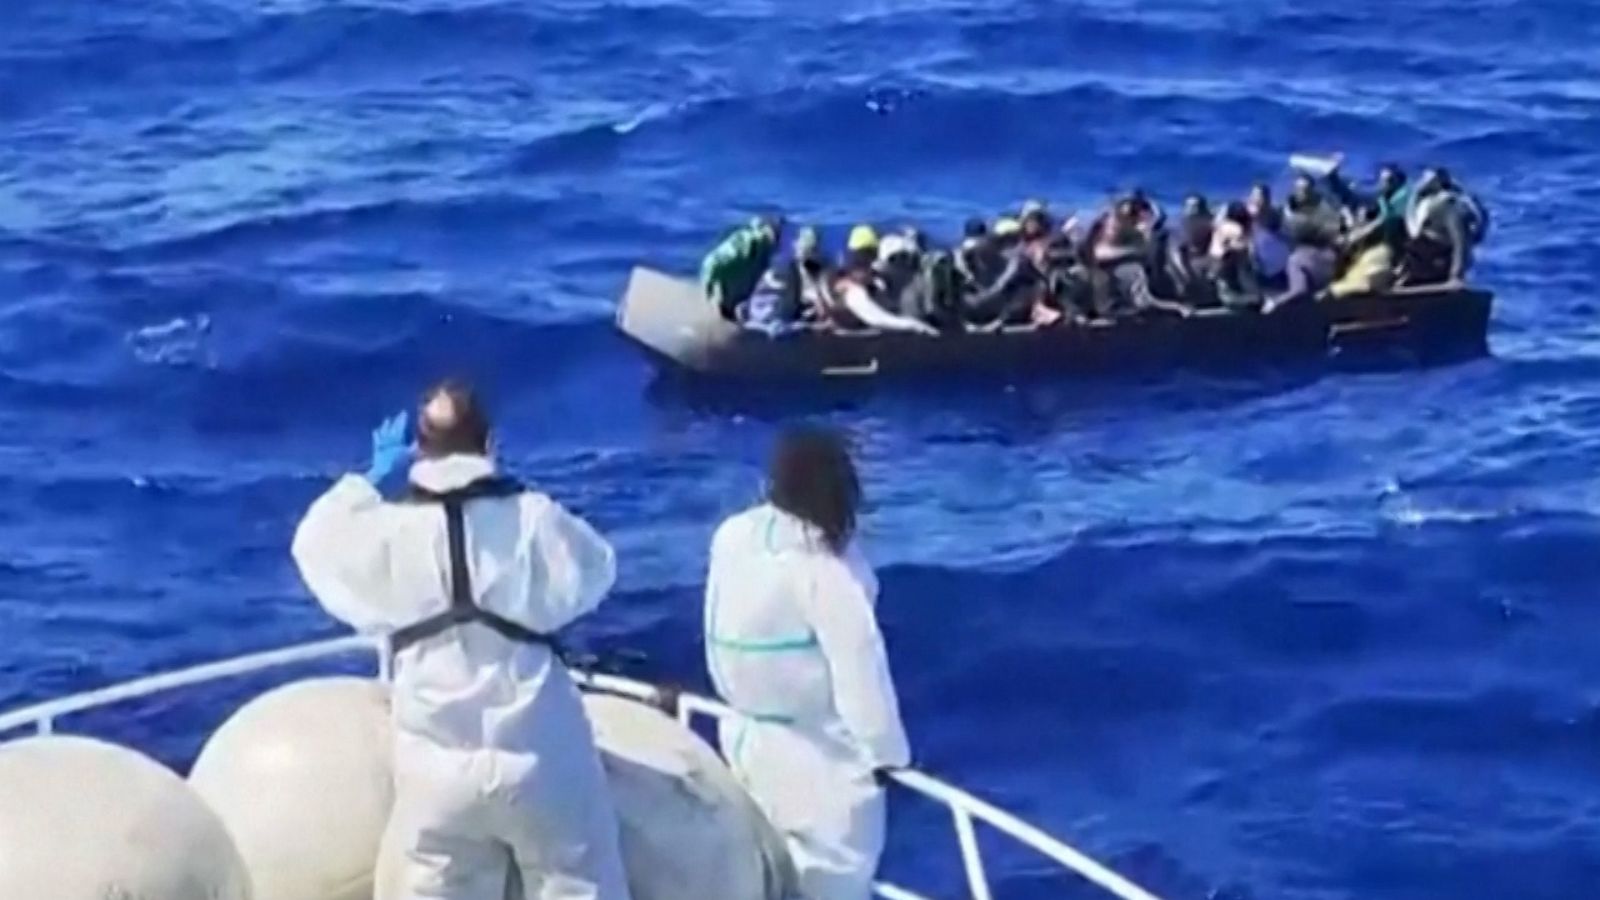 Authorities try to rescue 1,200 migrants after boats go adrift - Good ...